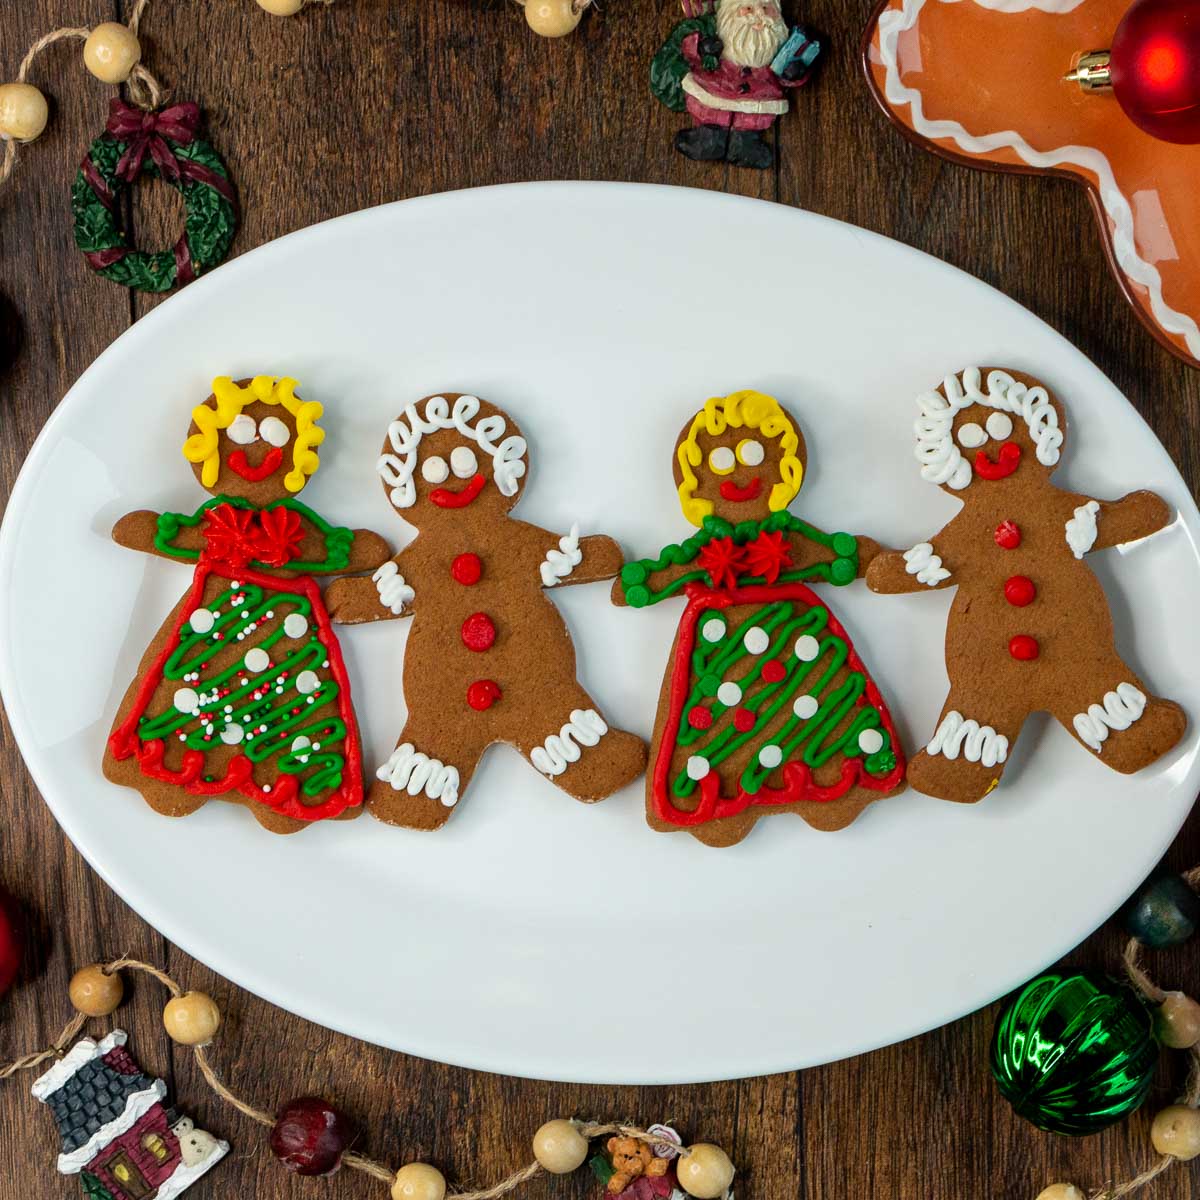 Gingerbread Man Cookie Baked with Love SILENT Wall Clock GIFT Kitchen Bakery 